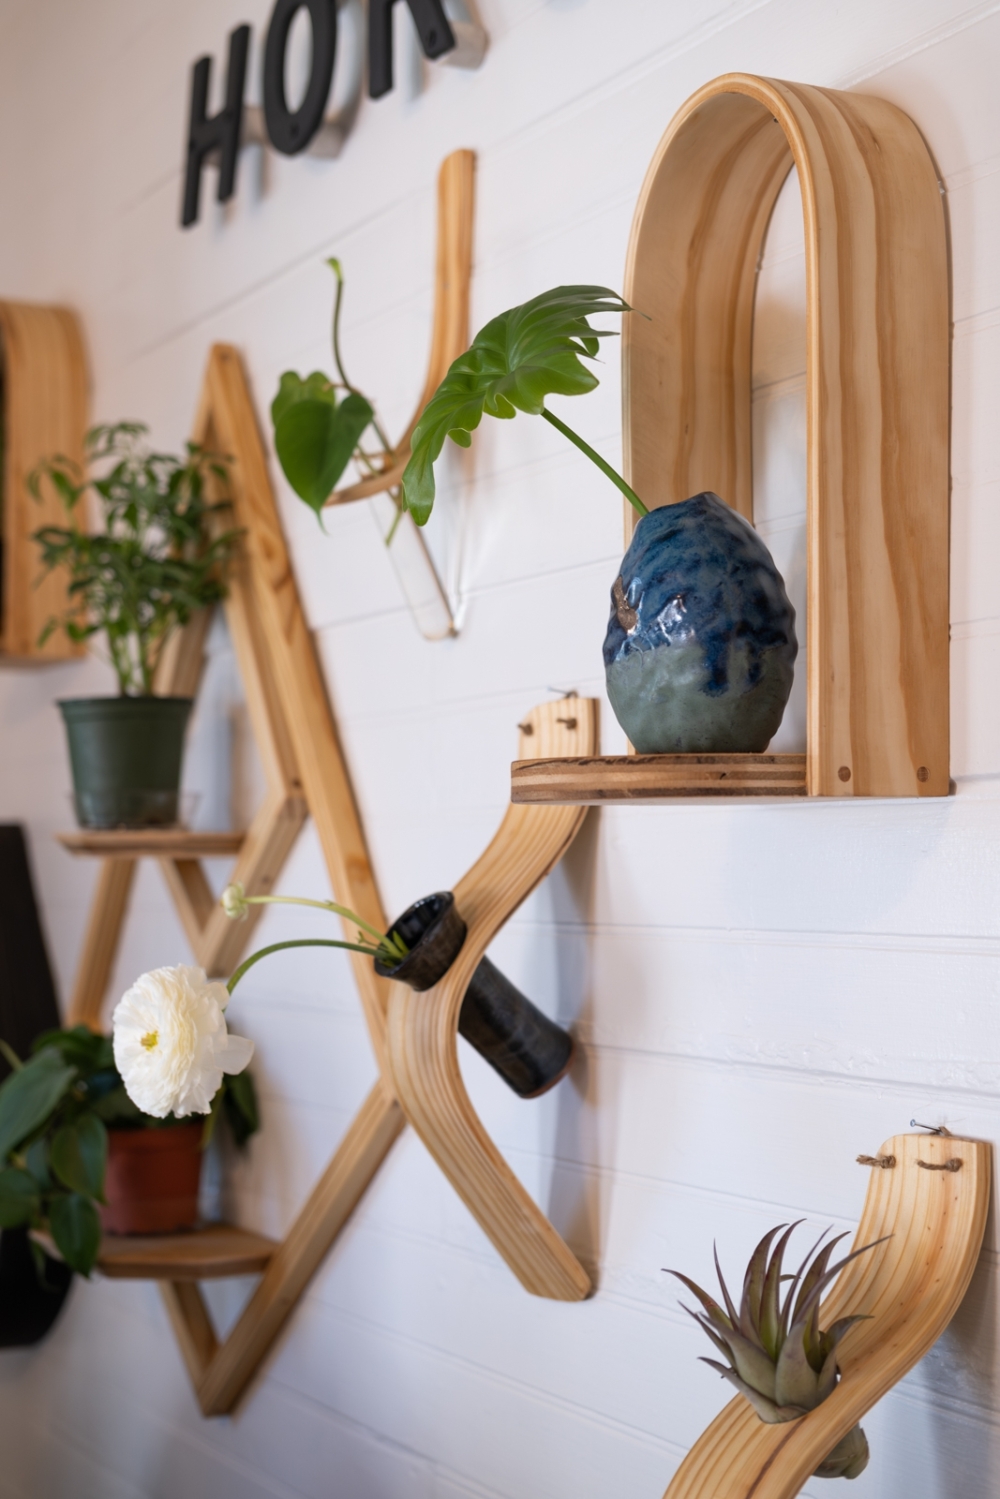 Horsemen Co. offers handcrafted bent-wood plant hangers, ceramic and wooden art pieces, and a variety of plants. (Courtesy Faith Benitez)